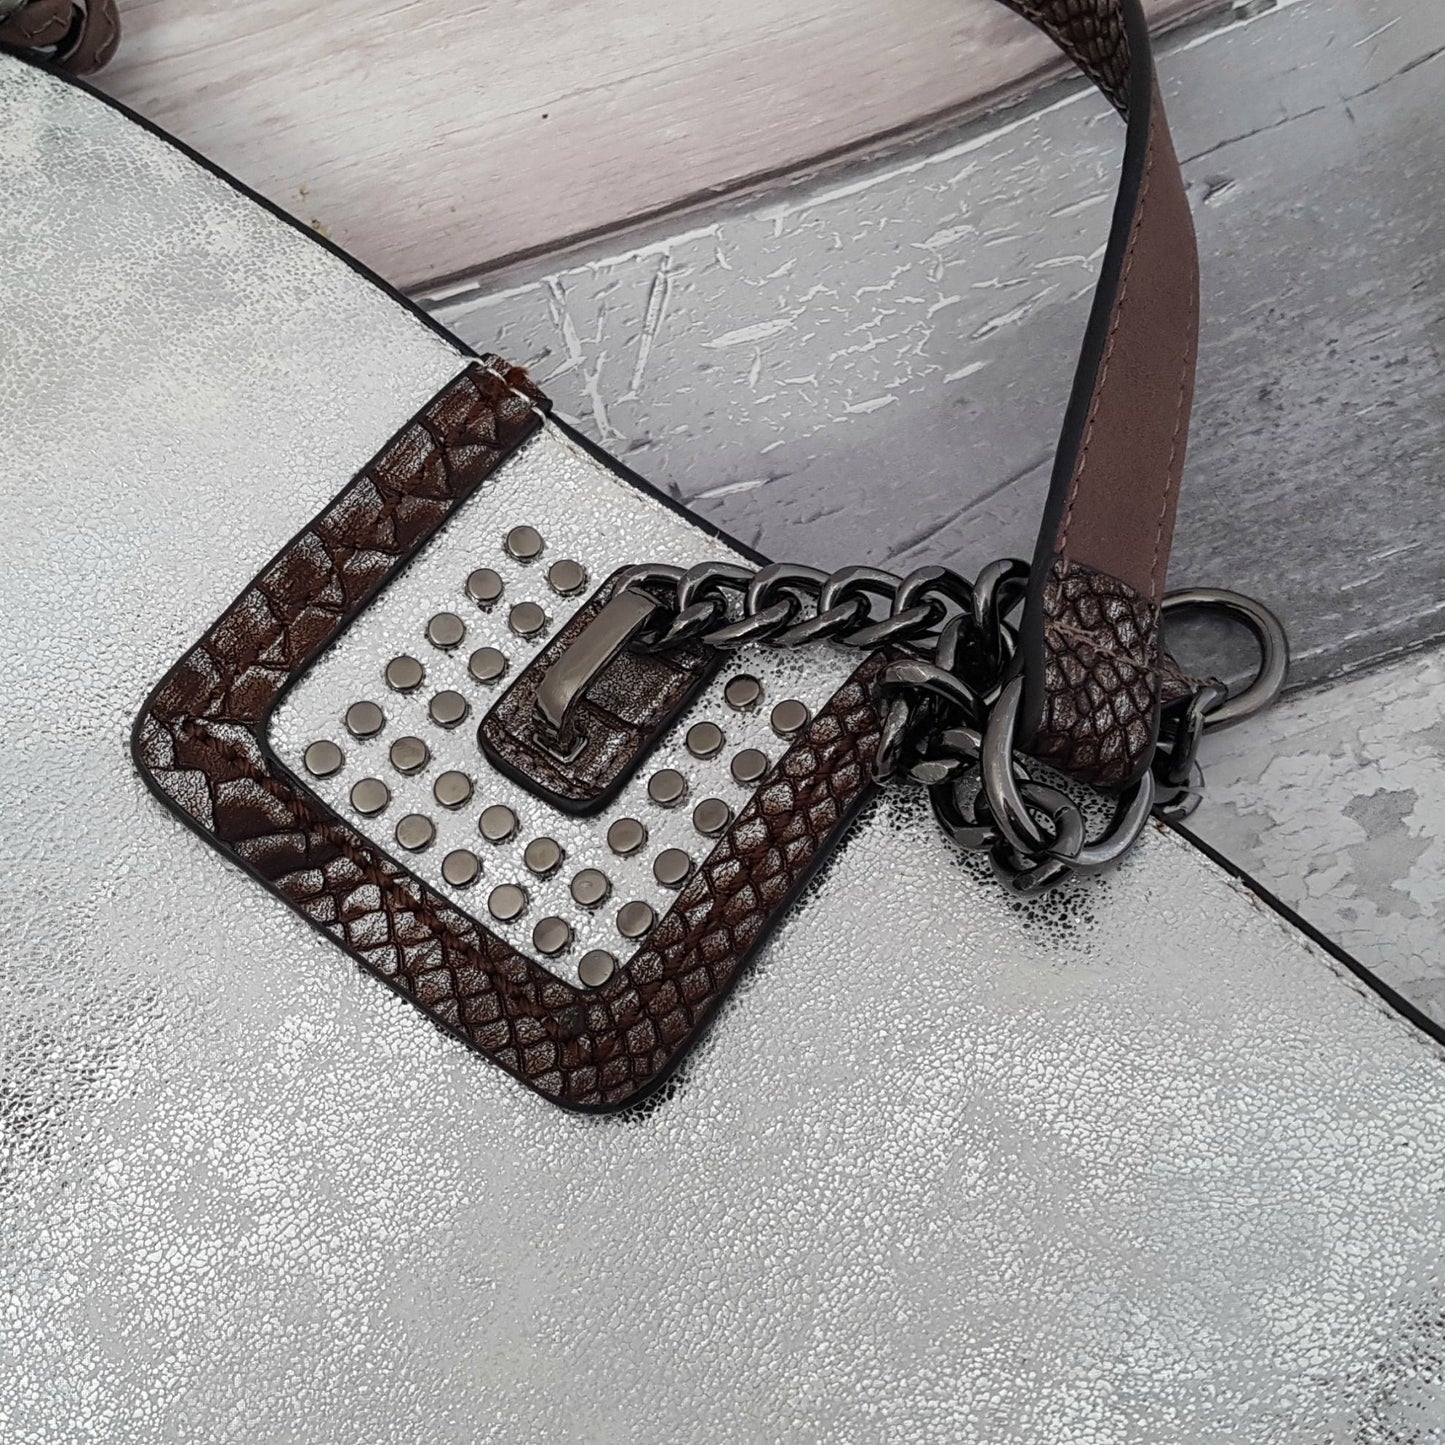 White Shoulder Bag with Metallic Silver Finish - End of Line